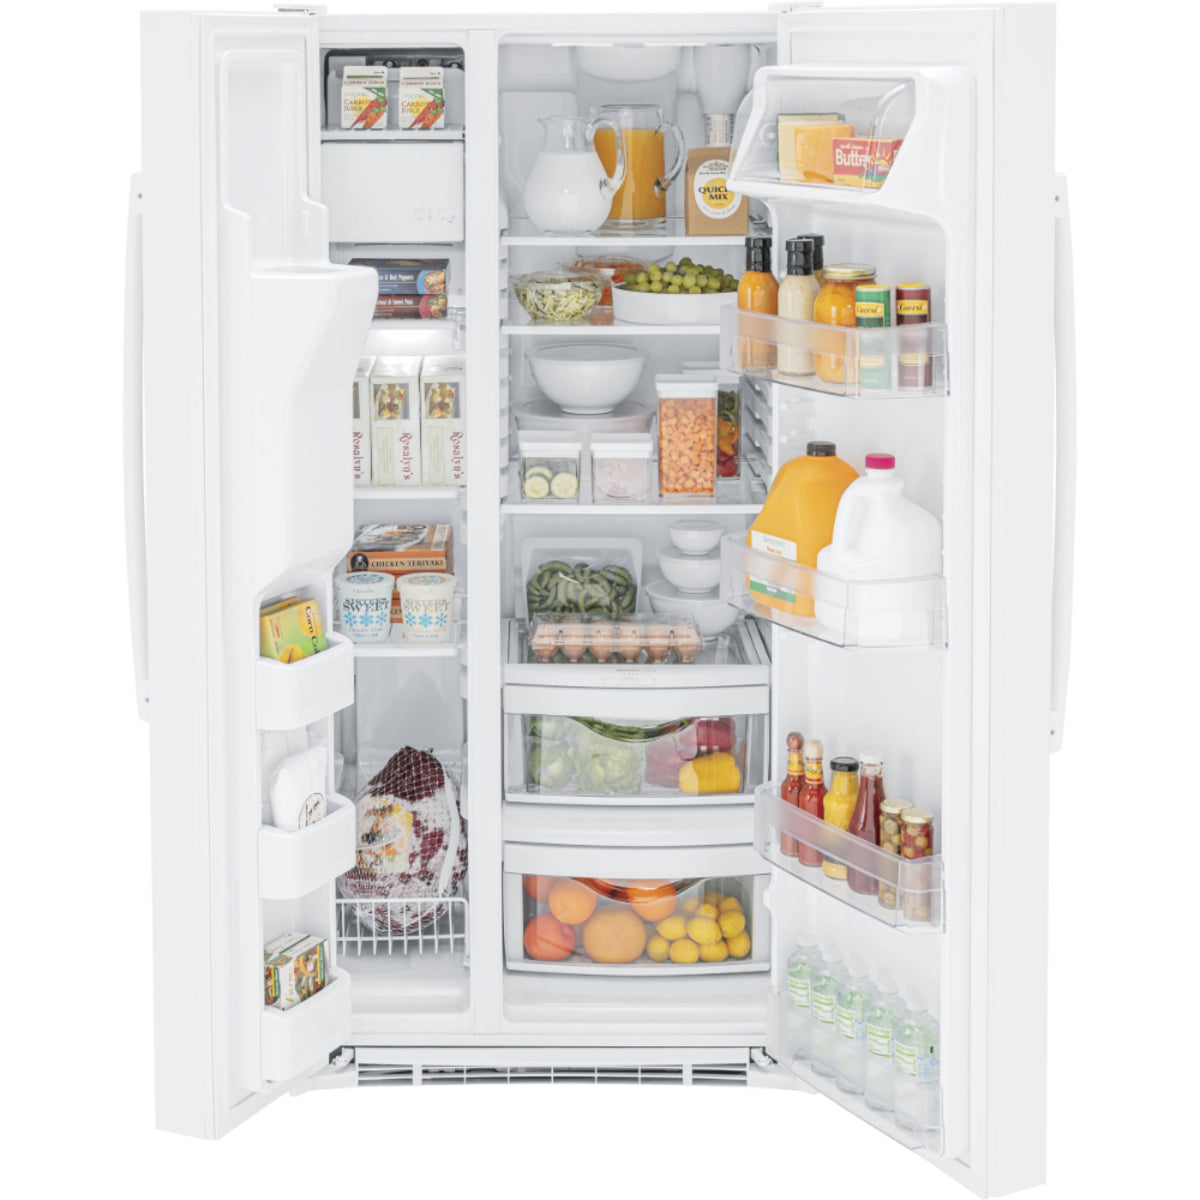 GE - 32.68 Inch 23.2 cu. ft Side by Side Refrigerator in White - GSS23GGPWW